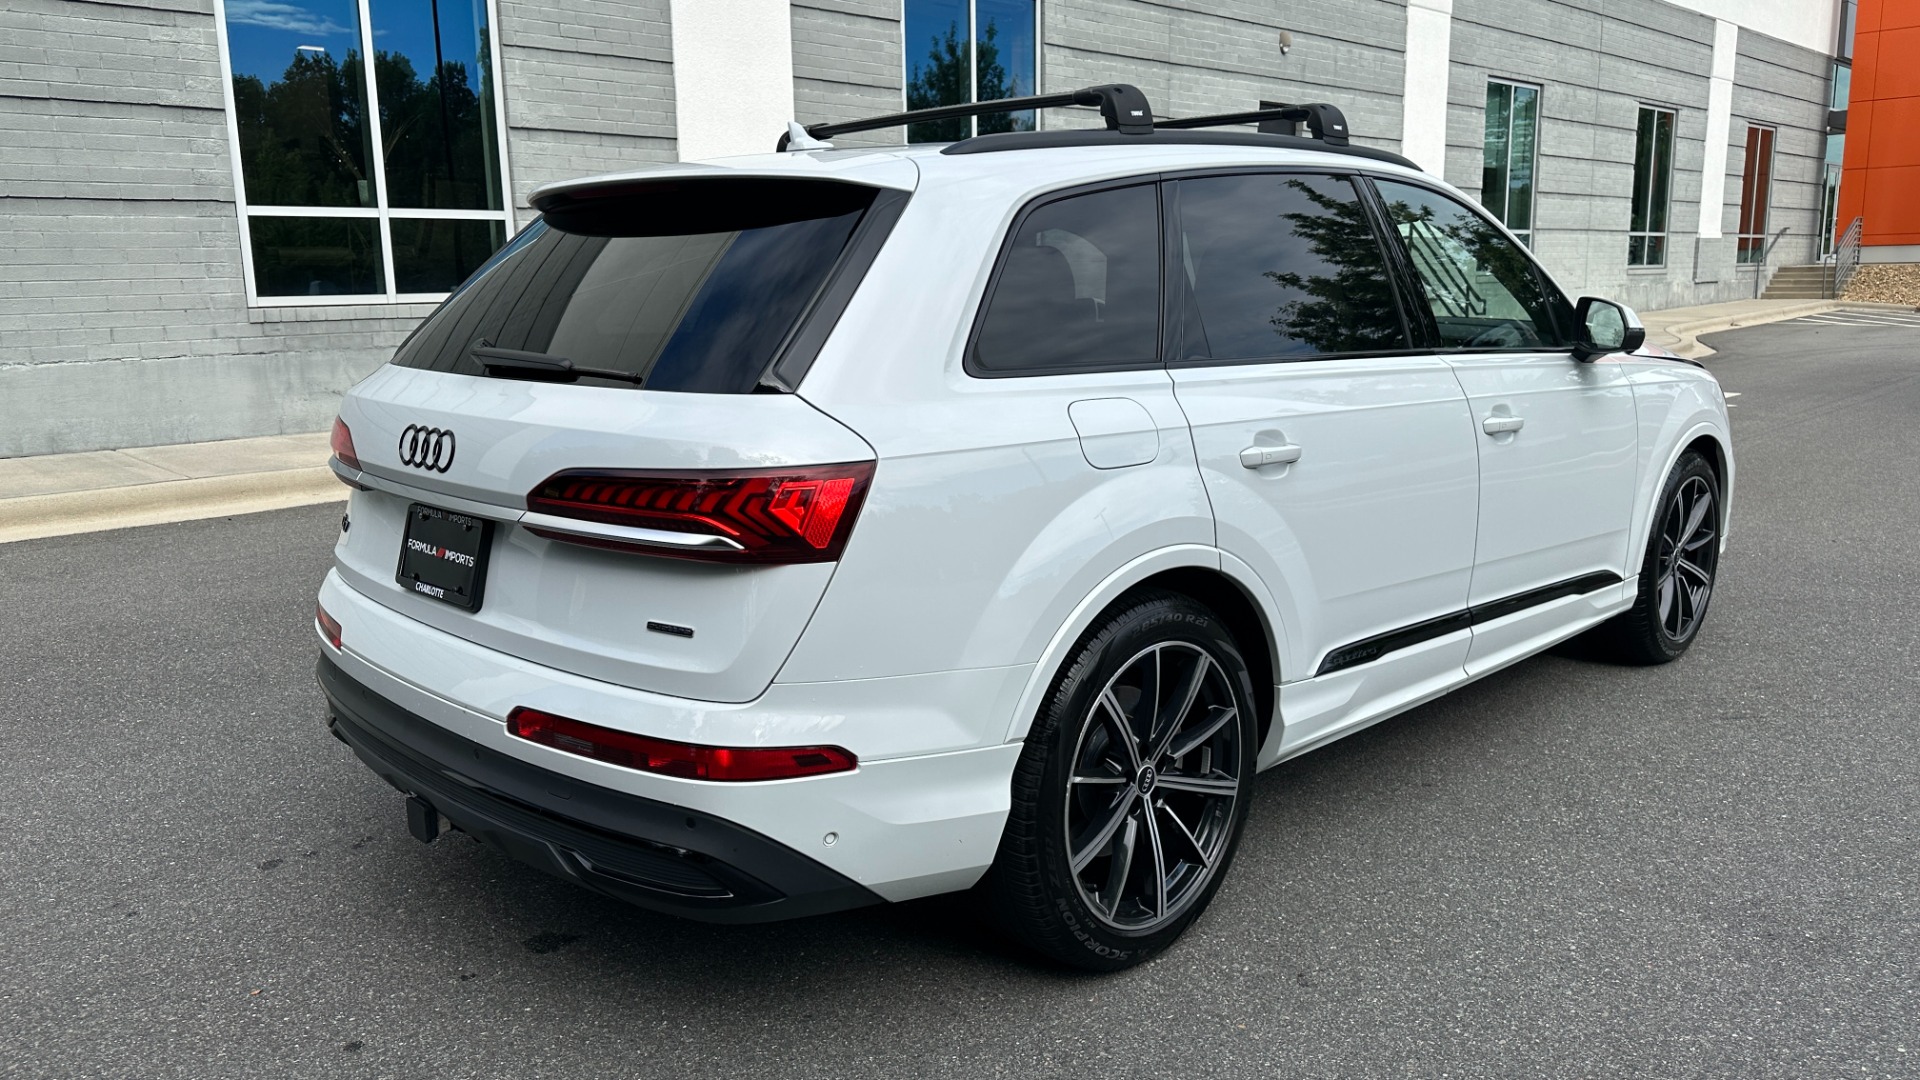 Used 2021 Audi Q7 PRESTIGE / BLACK OPTIC / BLACK EMBLEMS / TOWING PACKAGE for sale $54,500 at Formula Imports in Charlotte NC 28227 4